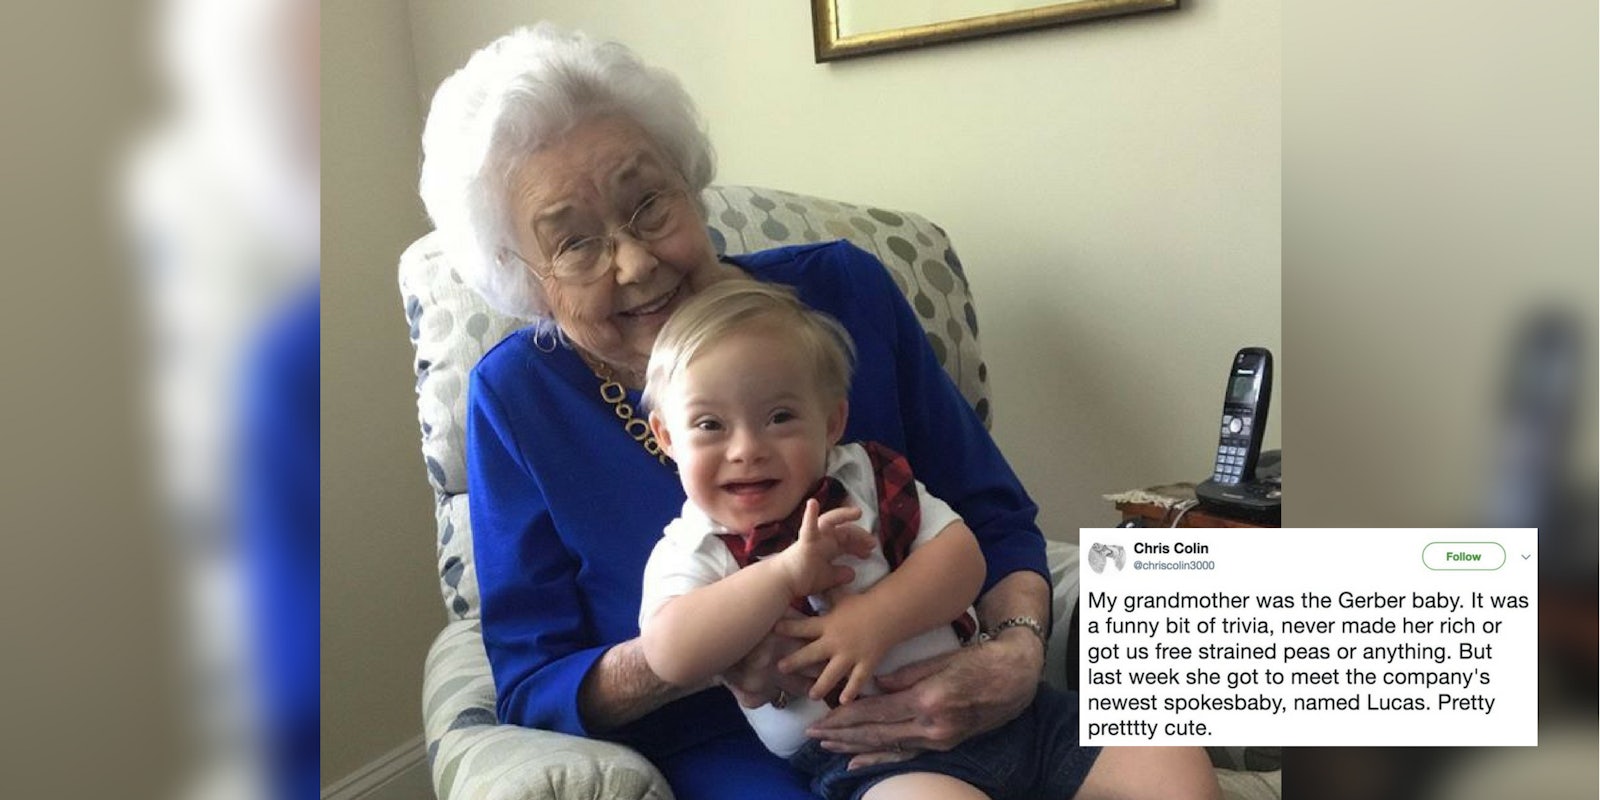 The original Gerber Baby Ann Turner Cook with the new spokesbaby, Lucas.